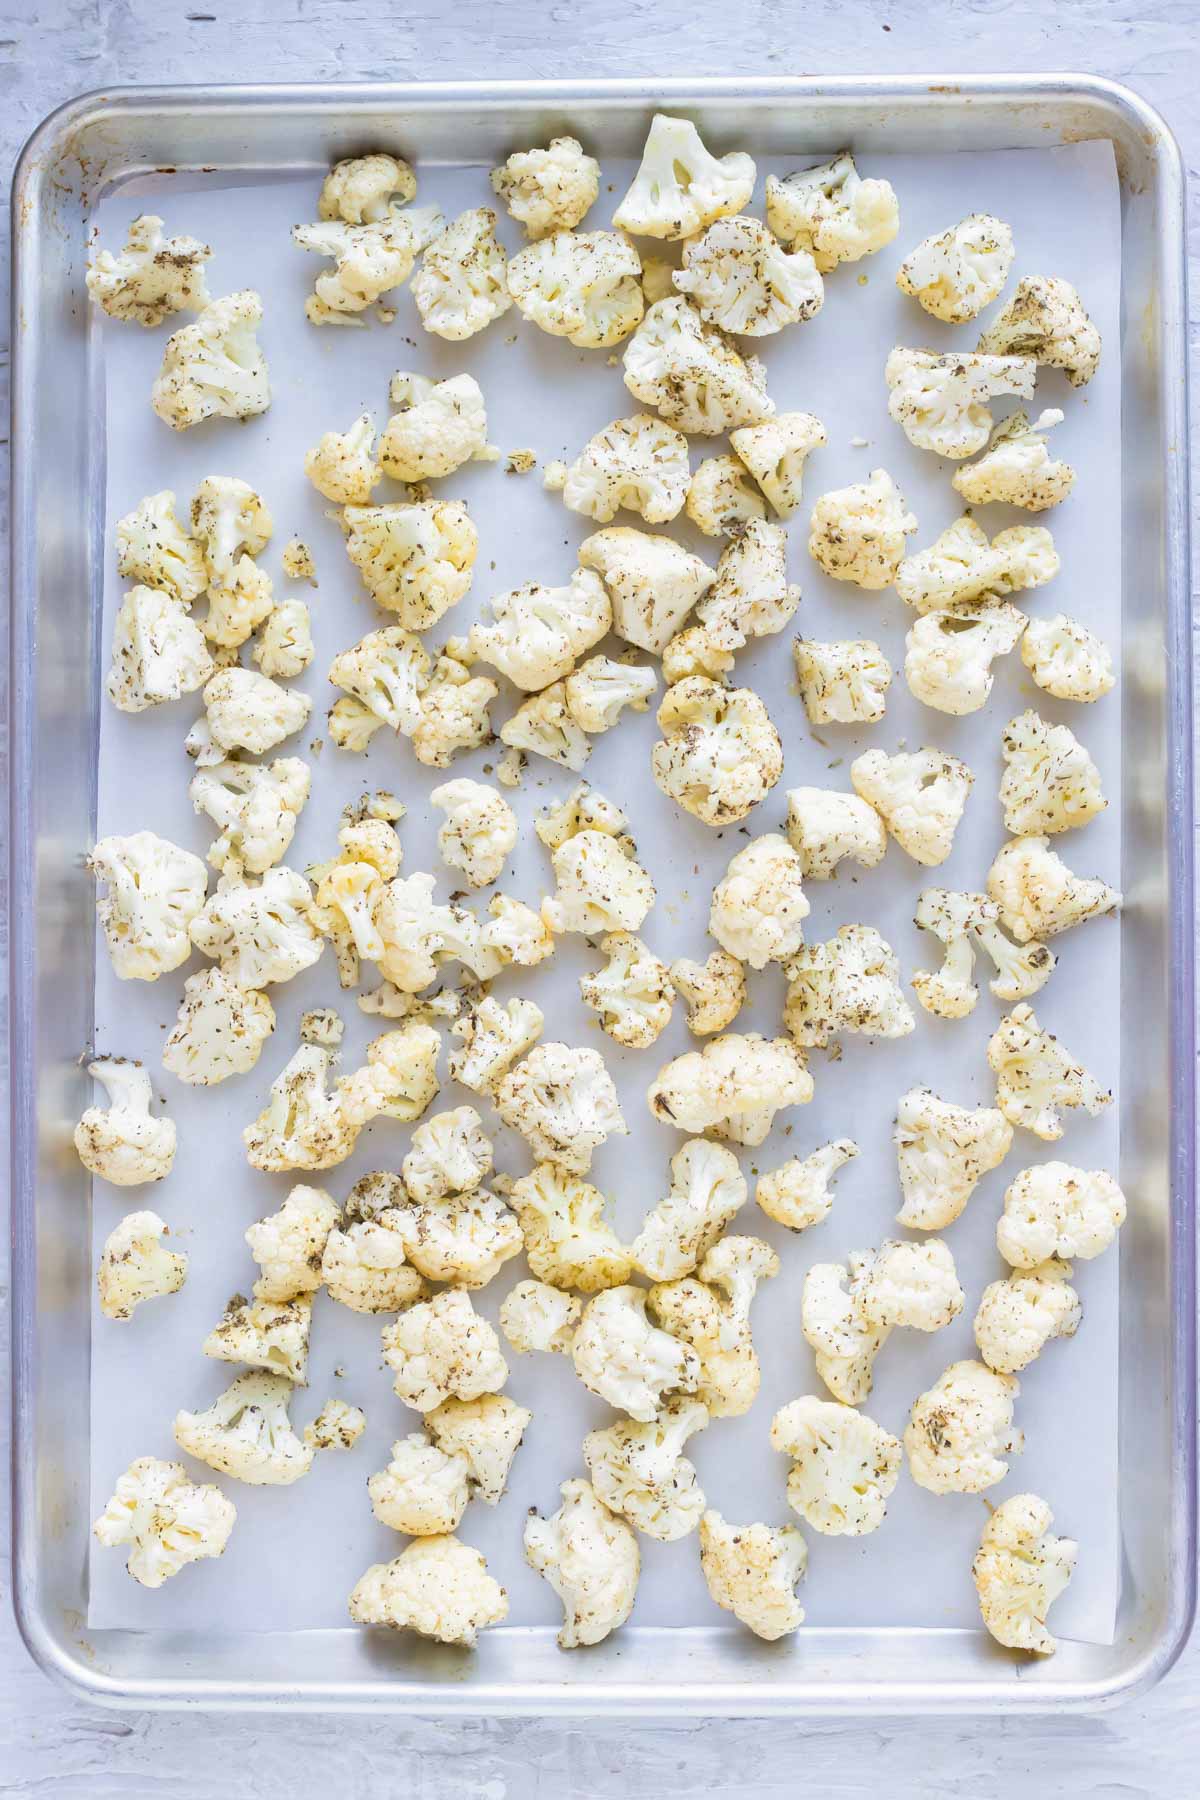 Cauliflower florets on a baking sheet to be roasted in the oven.